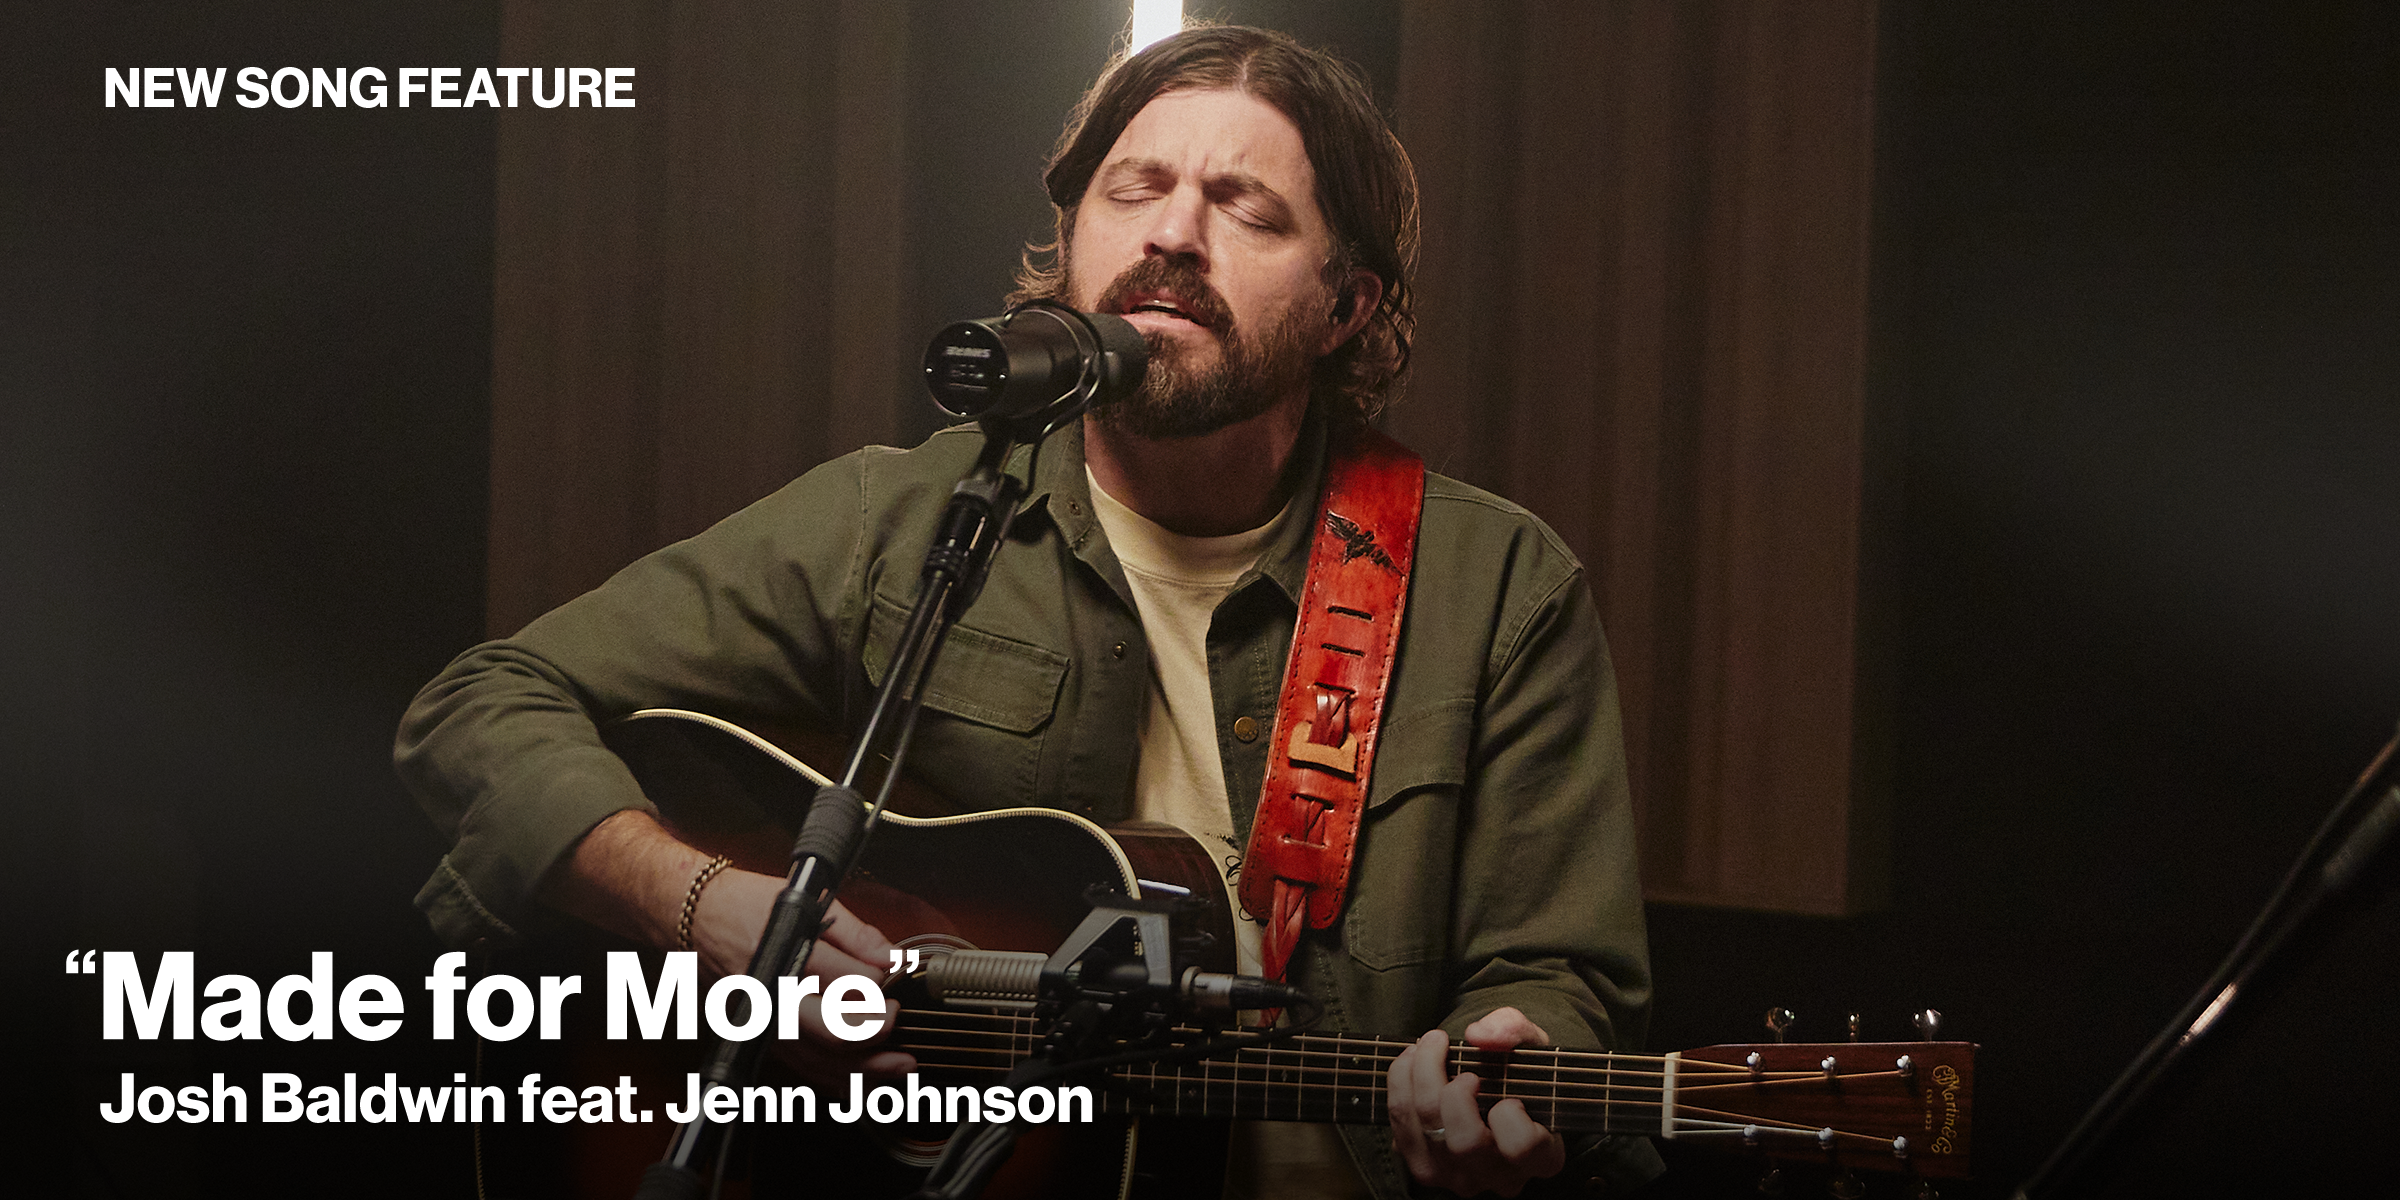 New Song Feature: "Made for More" Josh Baldwin feat. Jenn Johnson